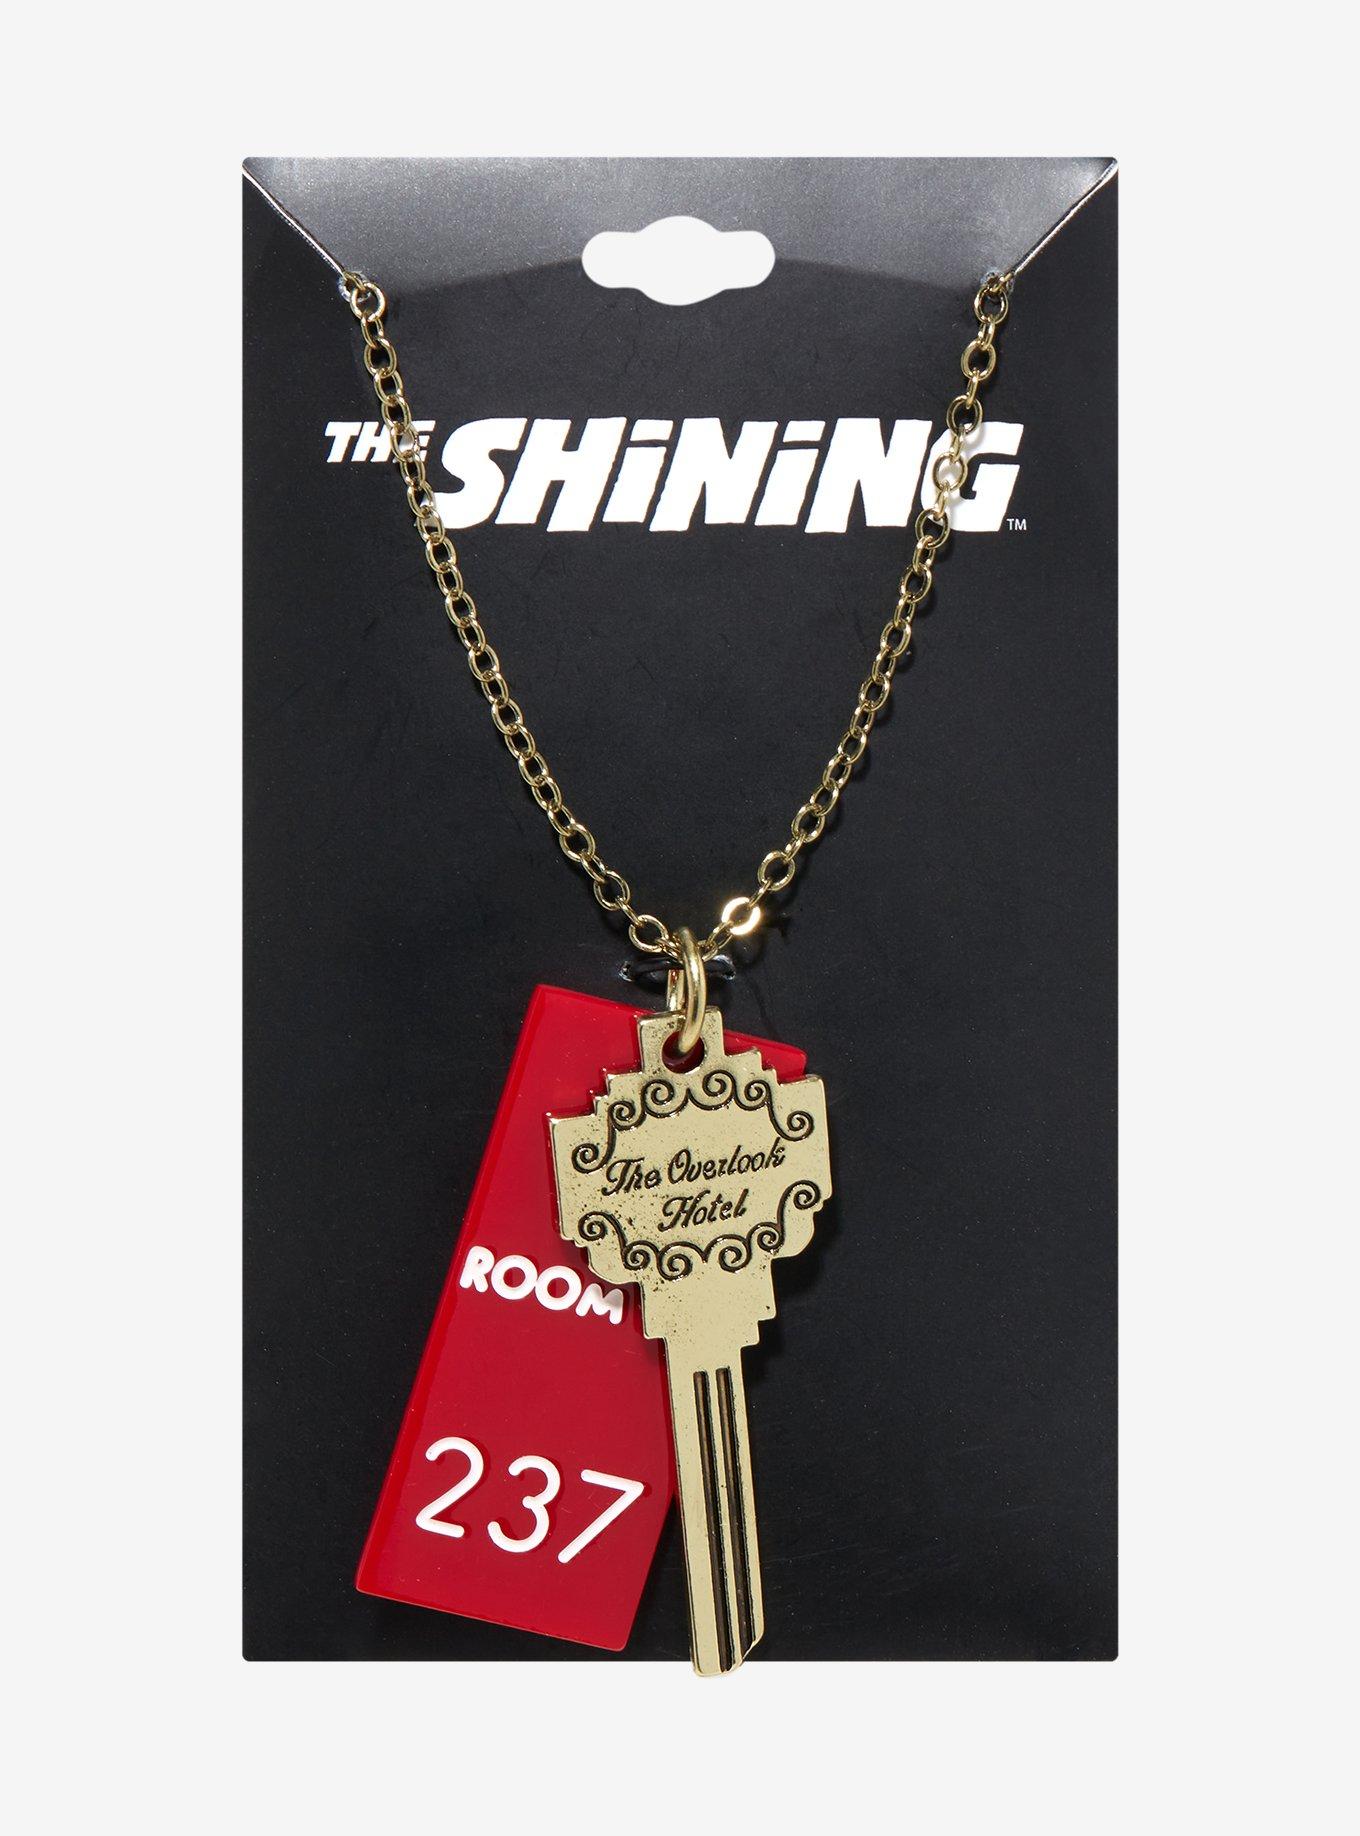 The Shining Overlook Hotel Key Necklace